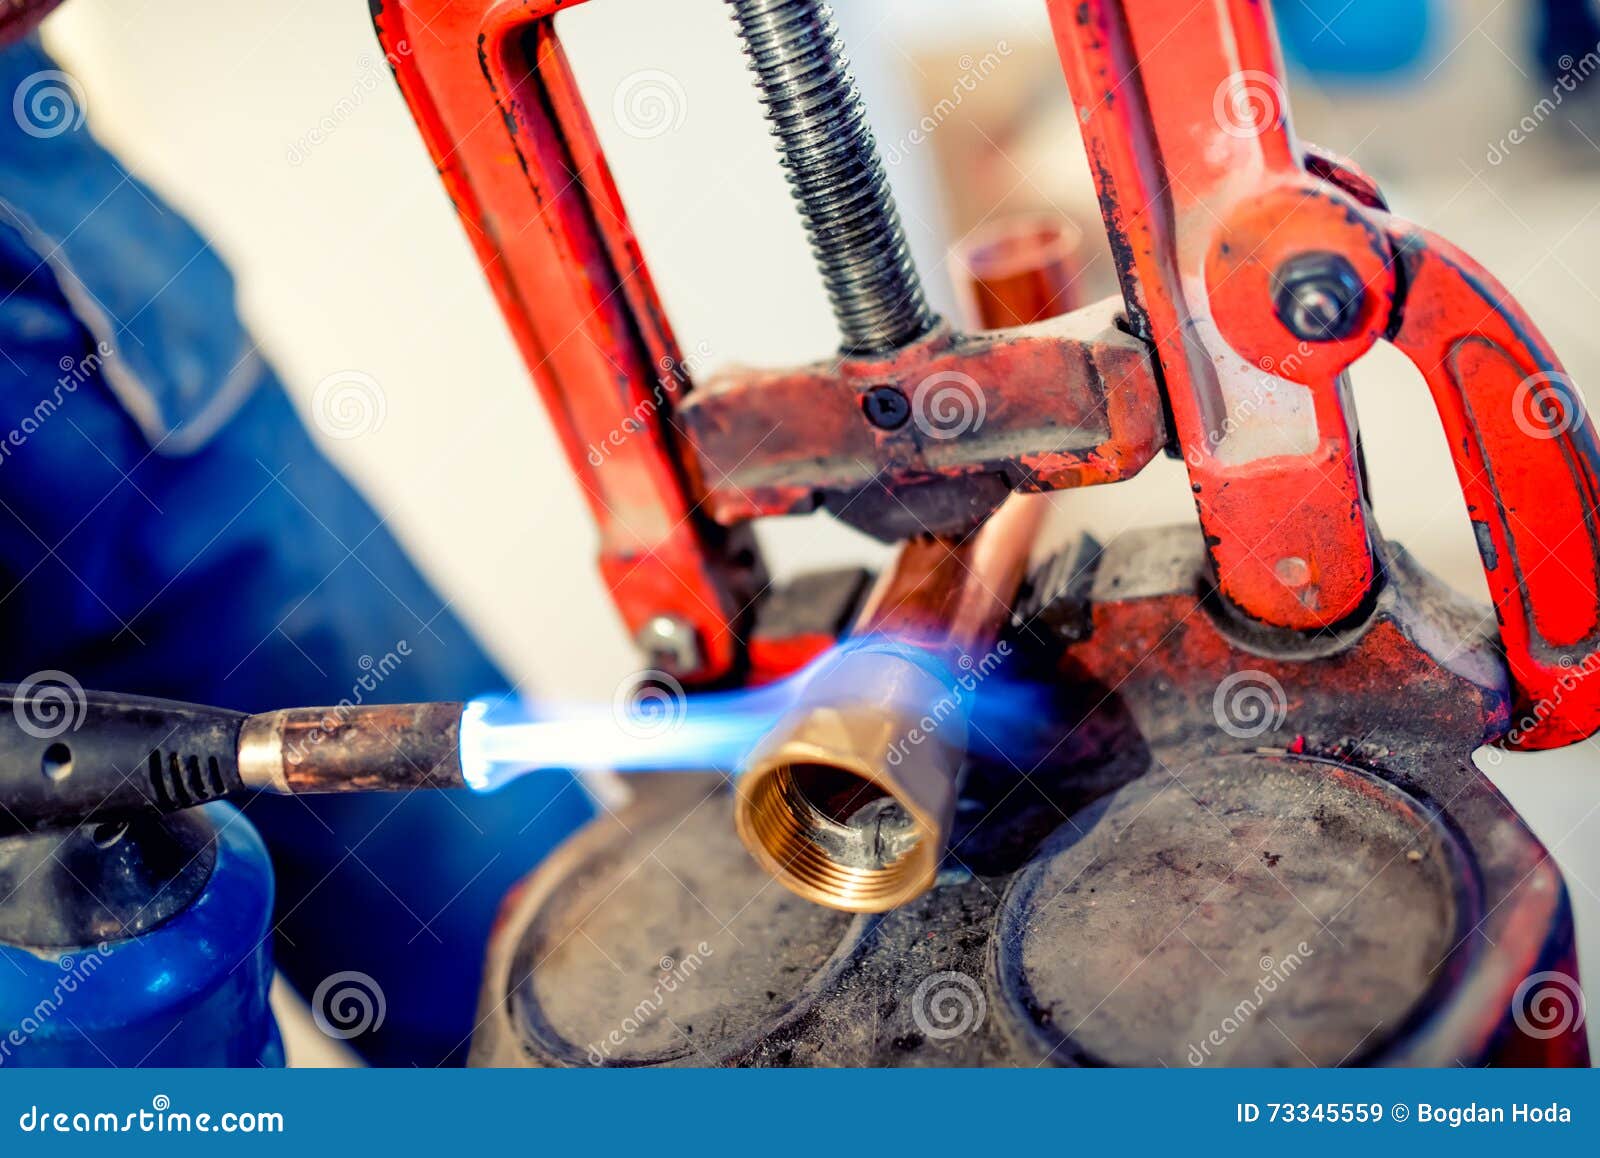 professional plumber welding copper and fittings with blowtorch